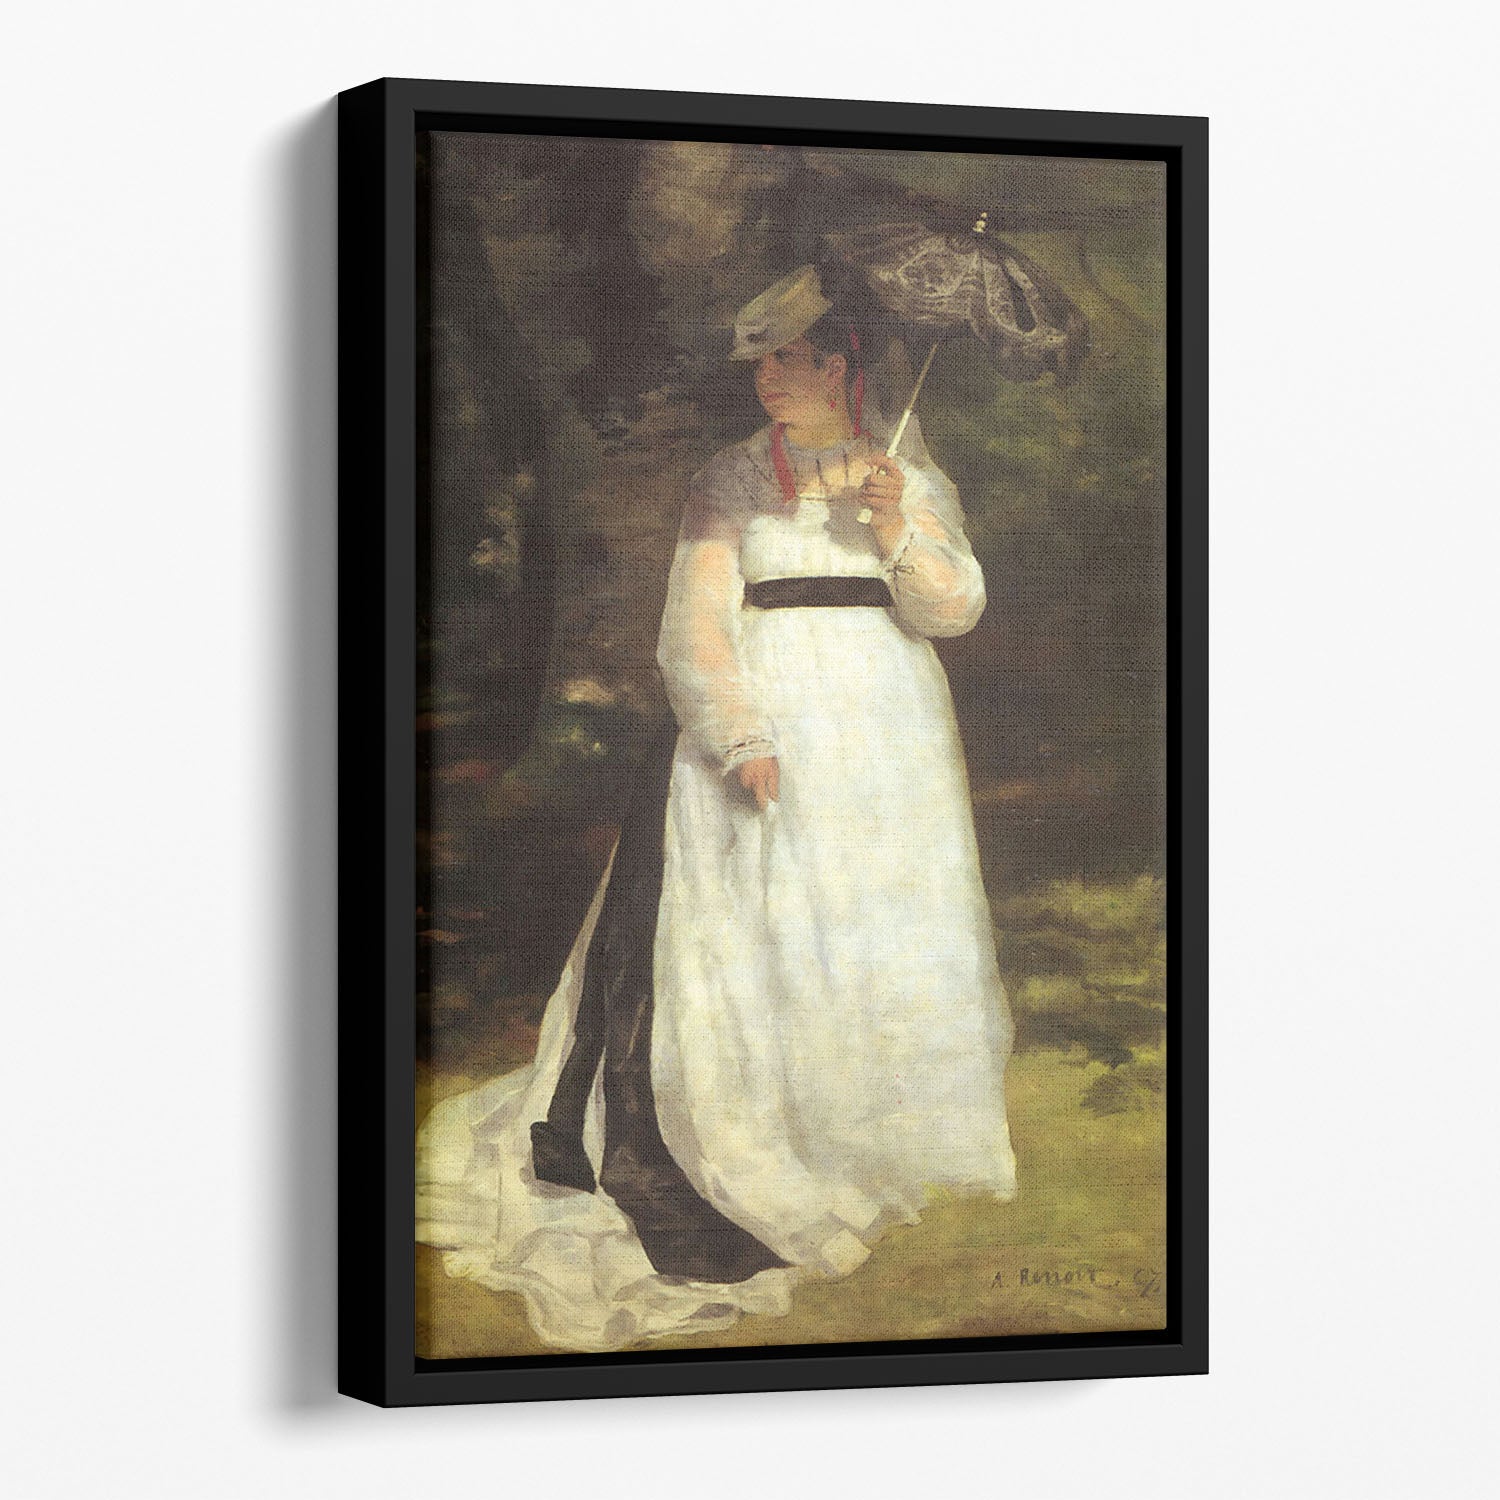 Lise with an Umbrella by Renoir Floating Framed Canvas